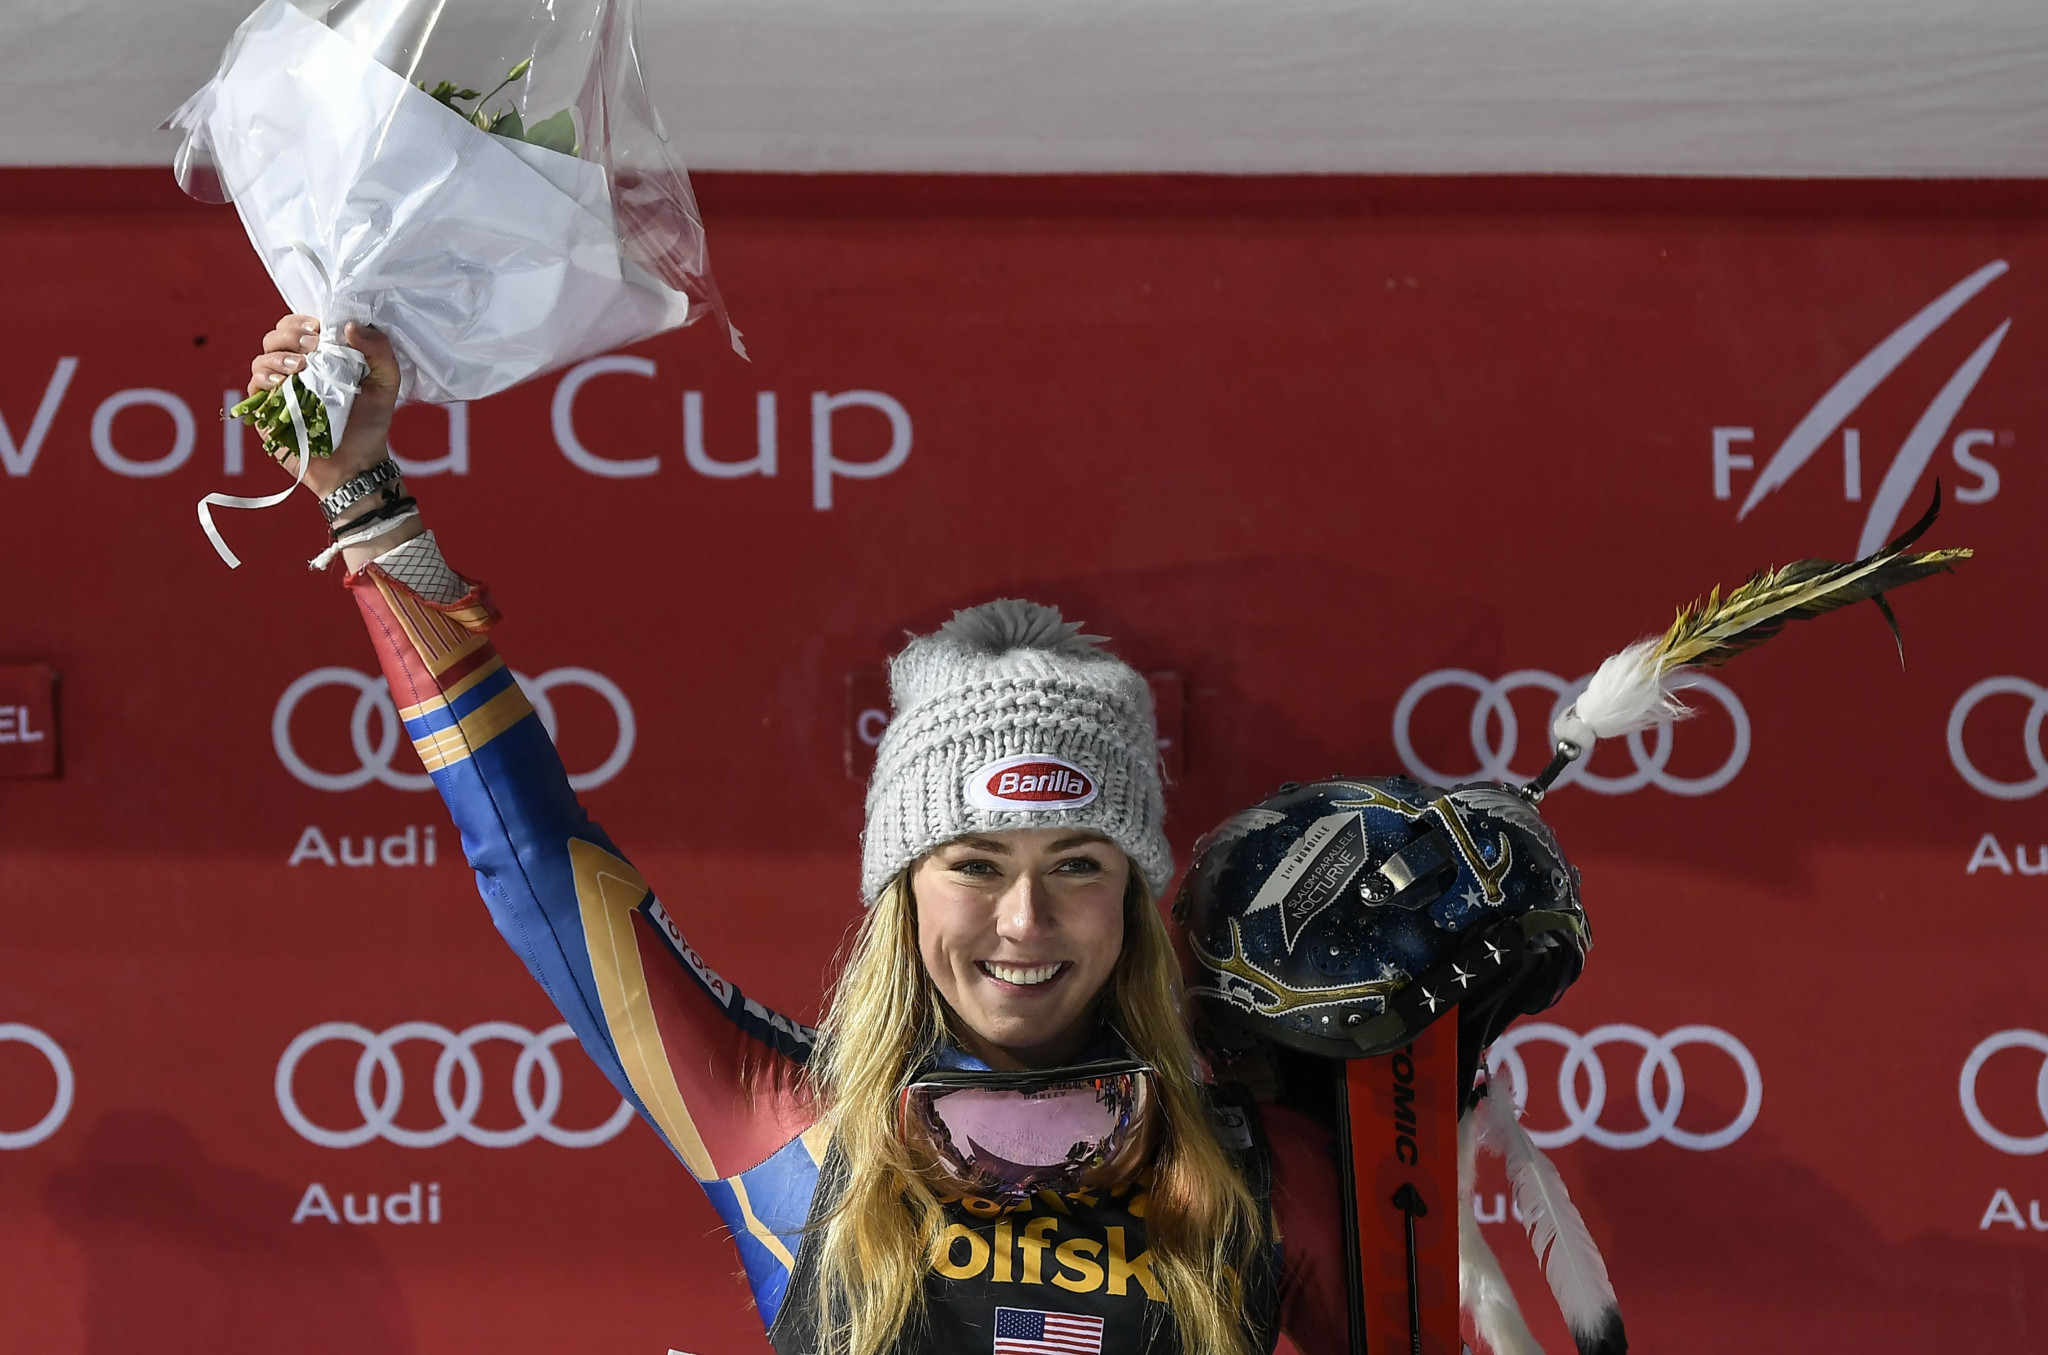 Mikaela Shiffrin is likely to retain her FIS alpine skiing world championship after another excellent display in Courchevel ©Getty Images